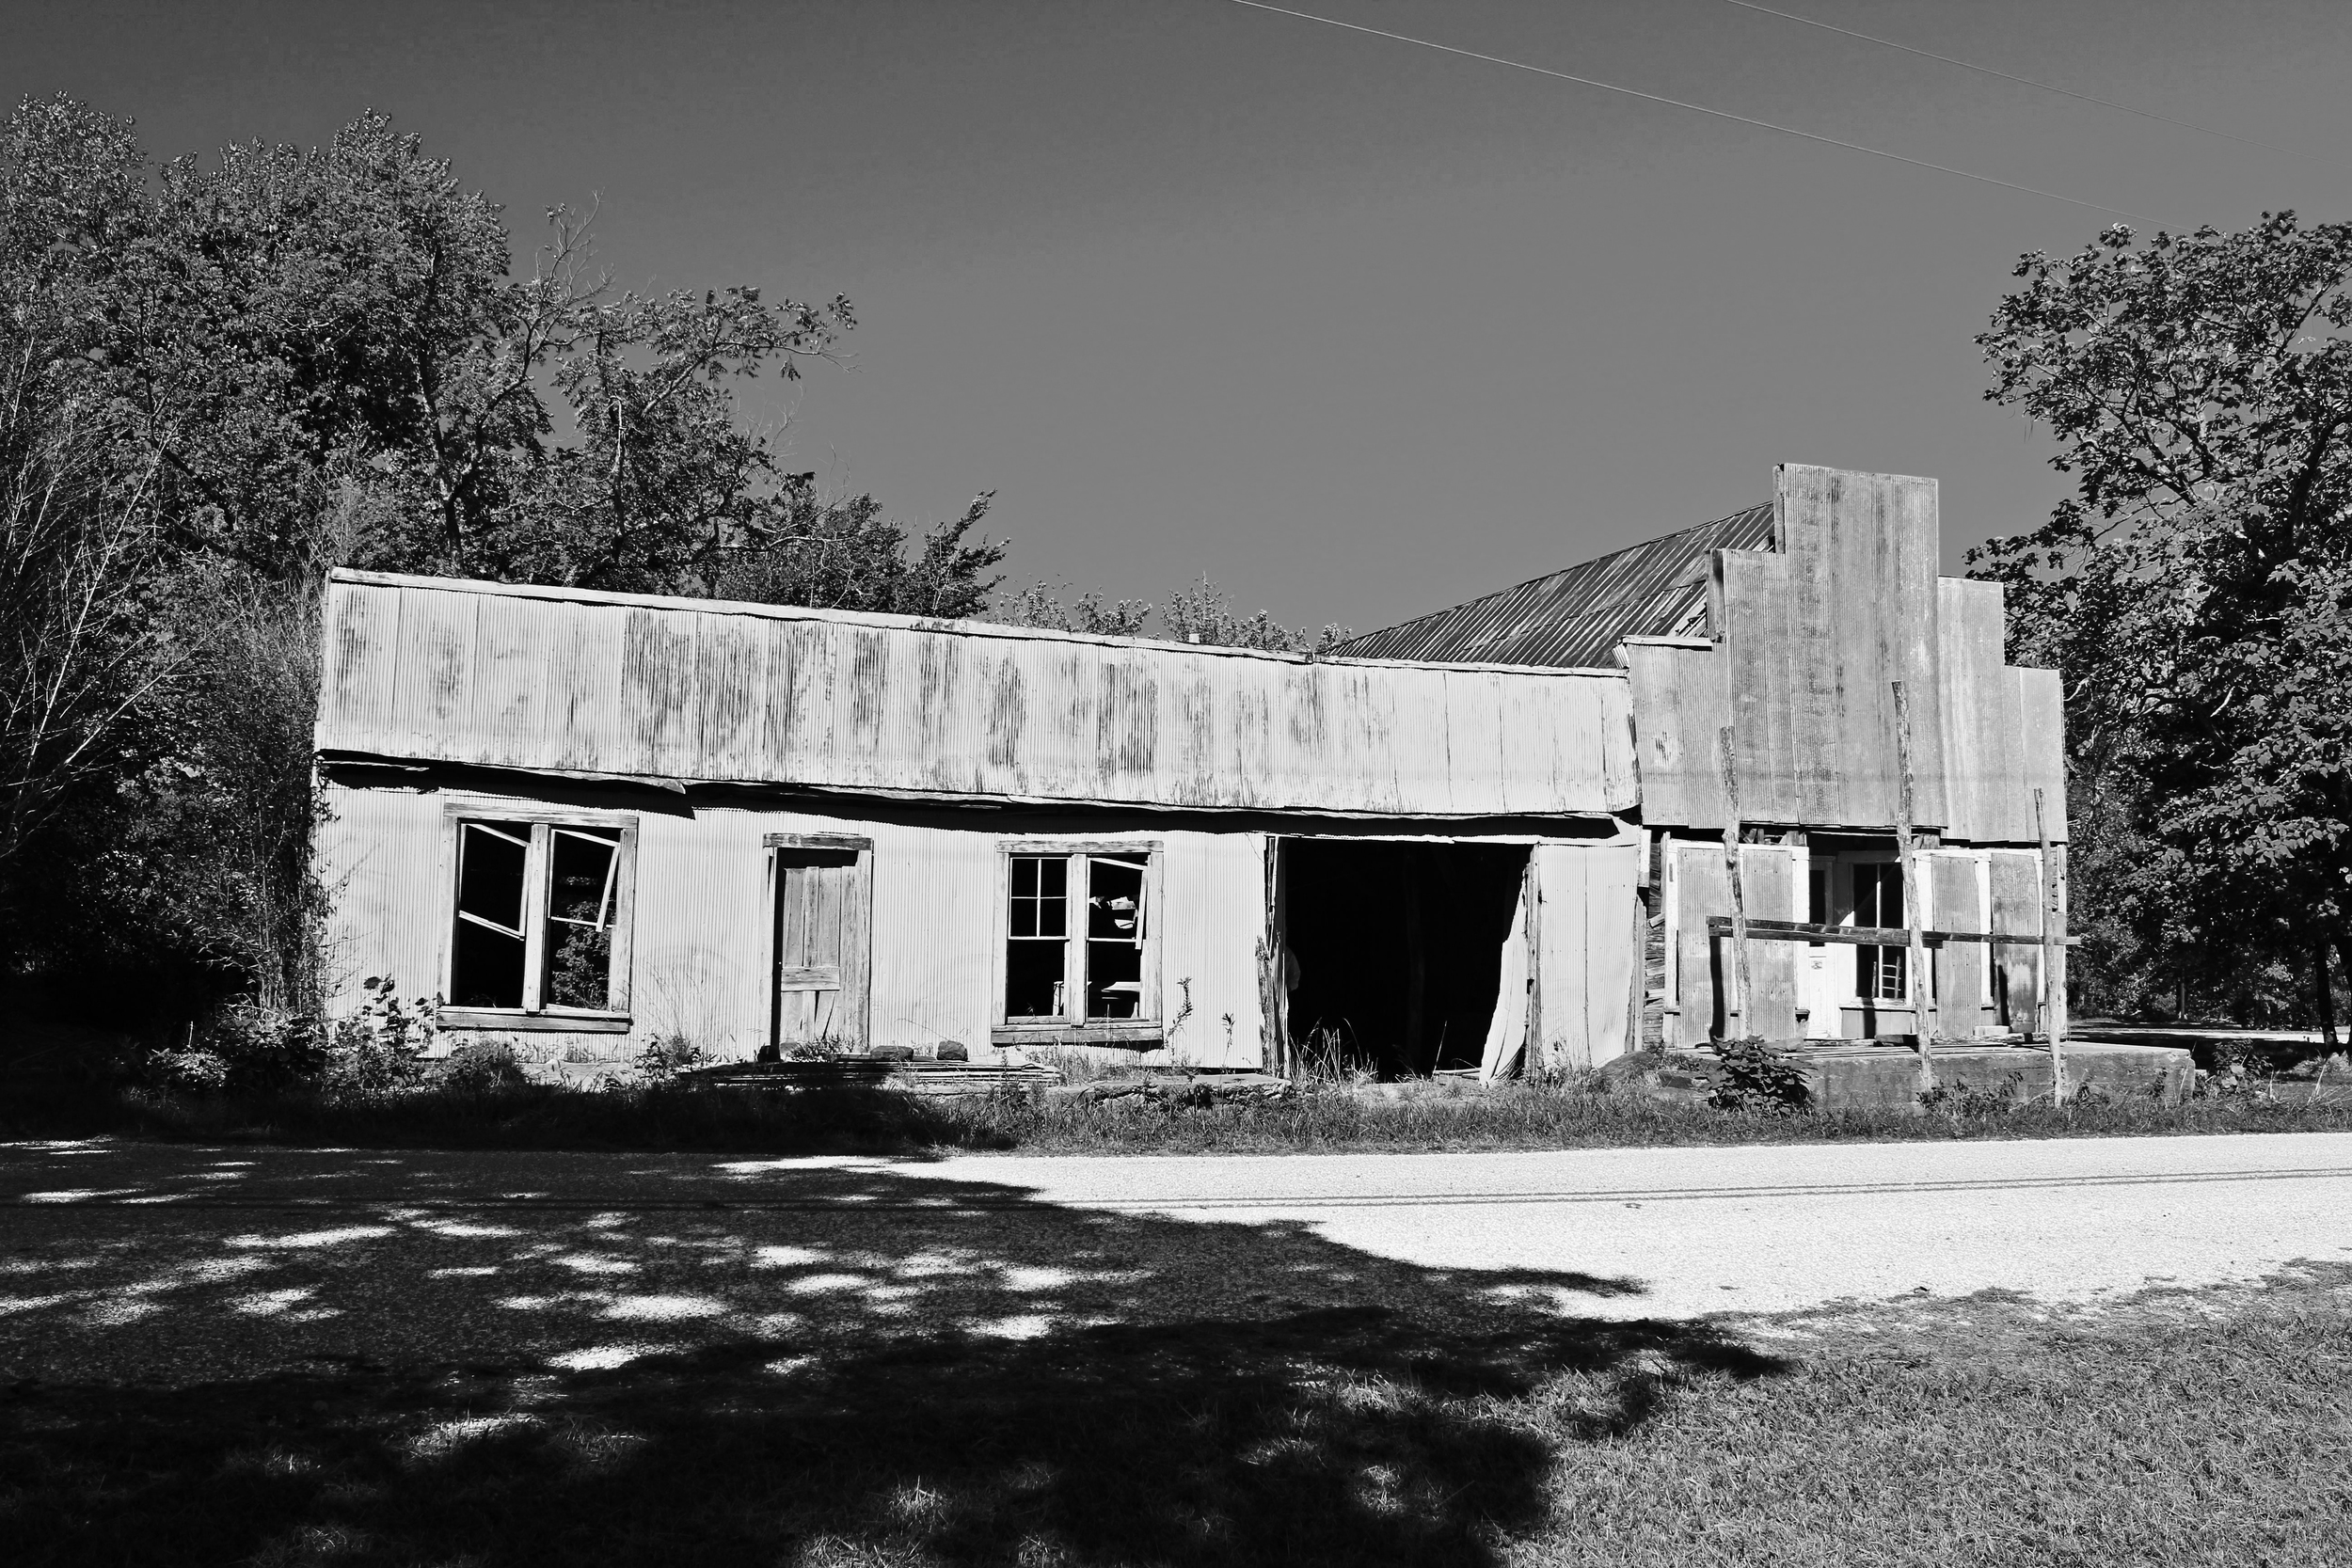    Clyde General Store  , 2013. Washington County, AR. B&amp;W HDR digital image. 